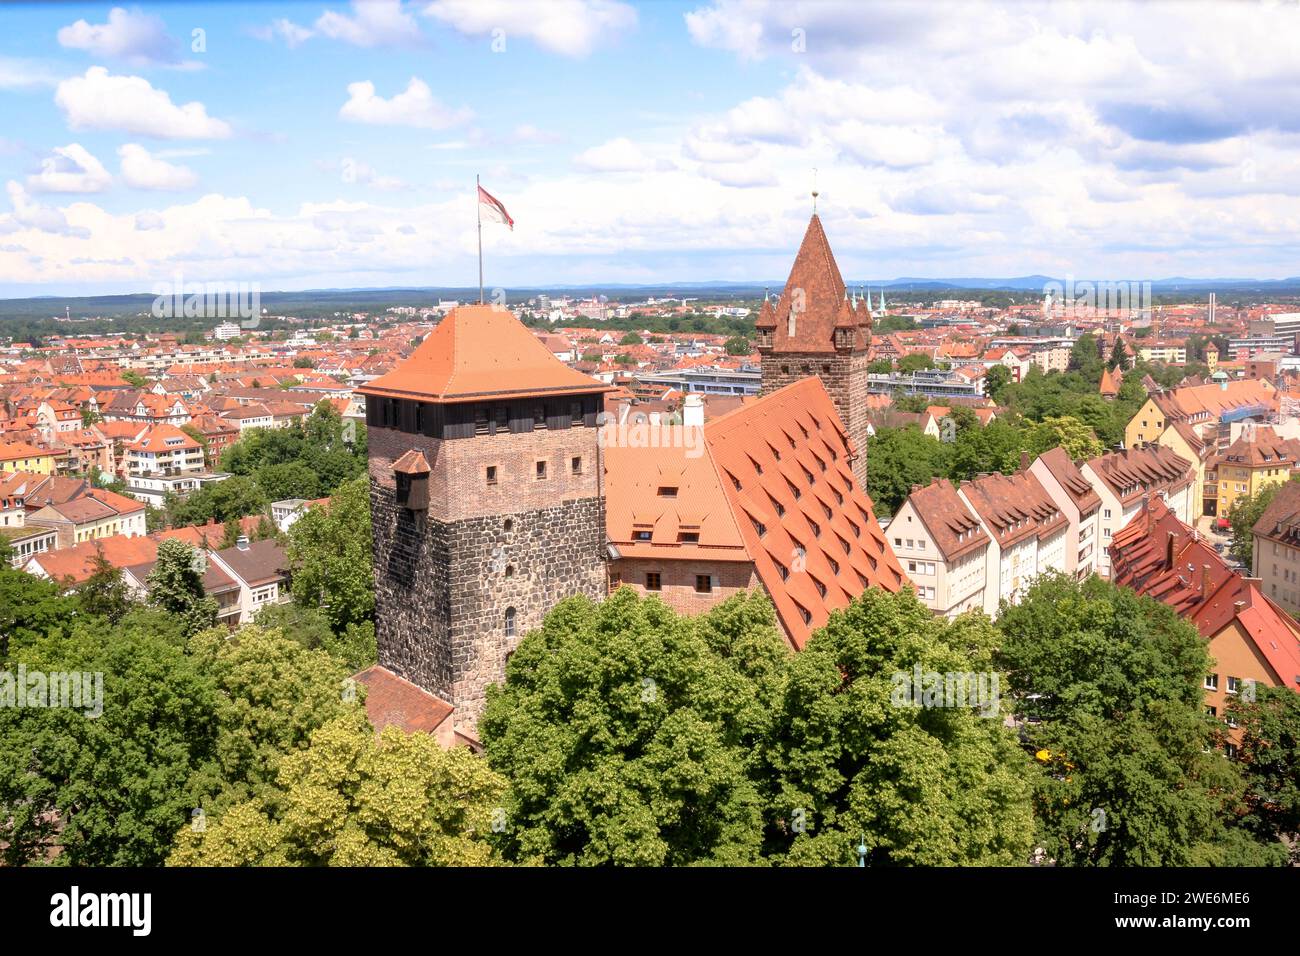 Views from Nuremberg Old Town, Germany Stock Photo